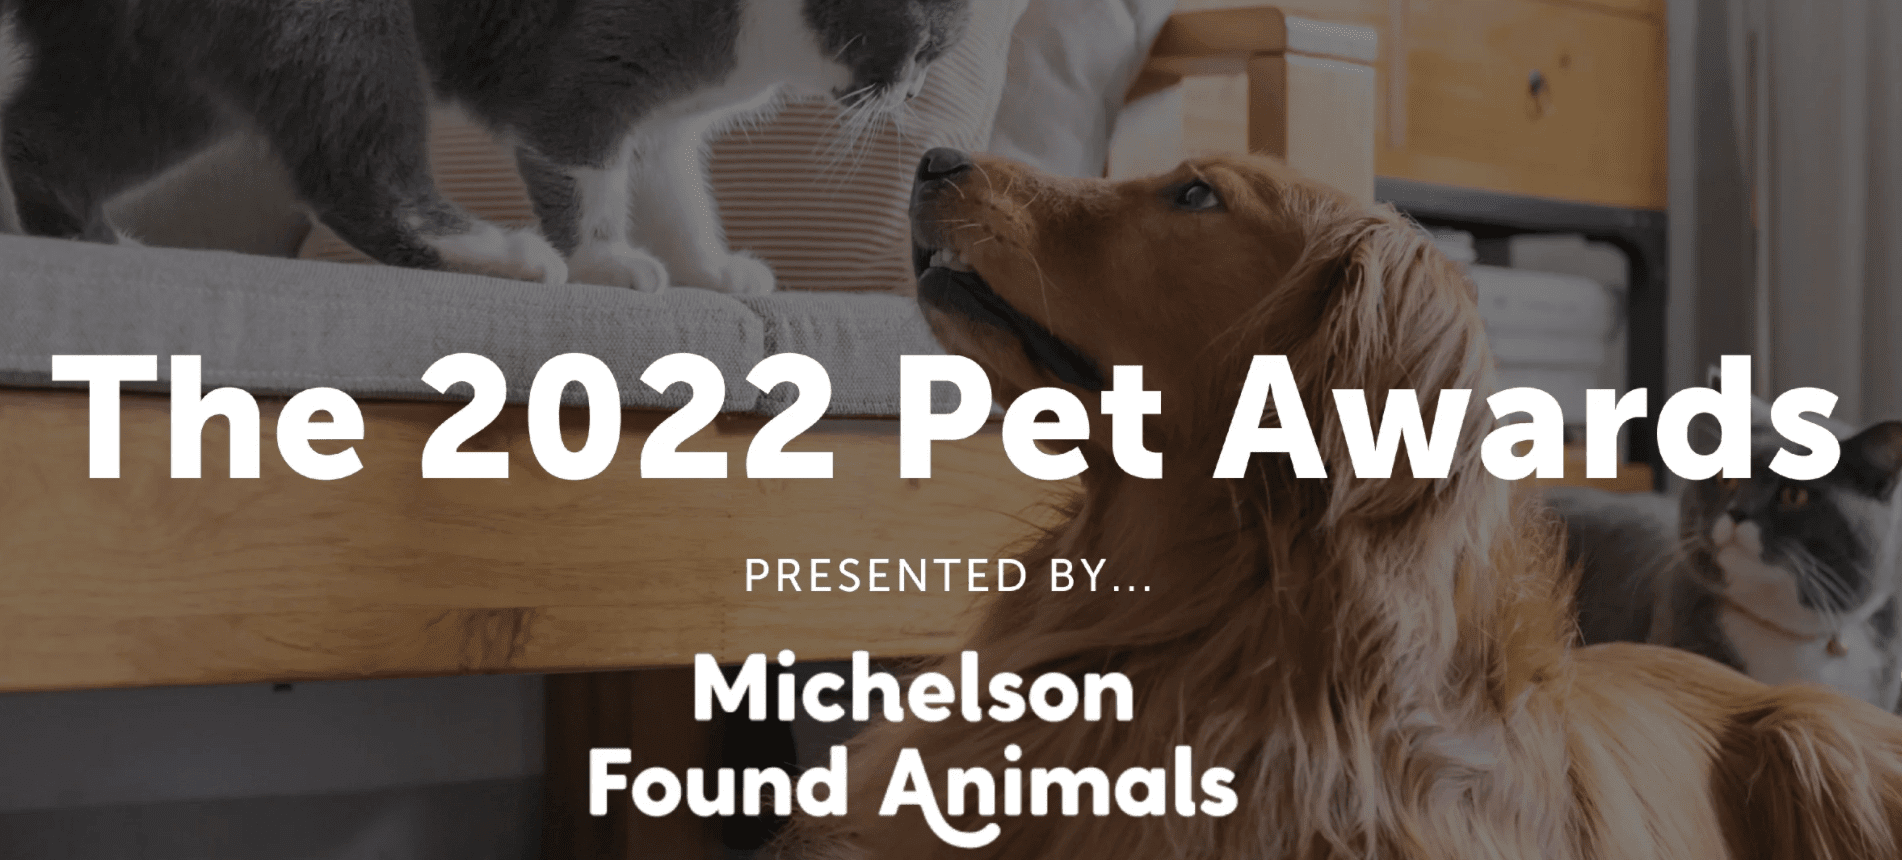 Application Period for the 2022 Pet Awards Extended to Friday